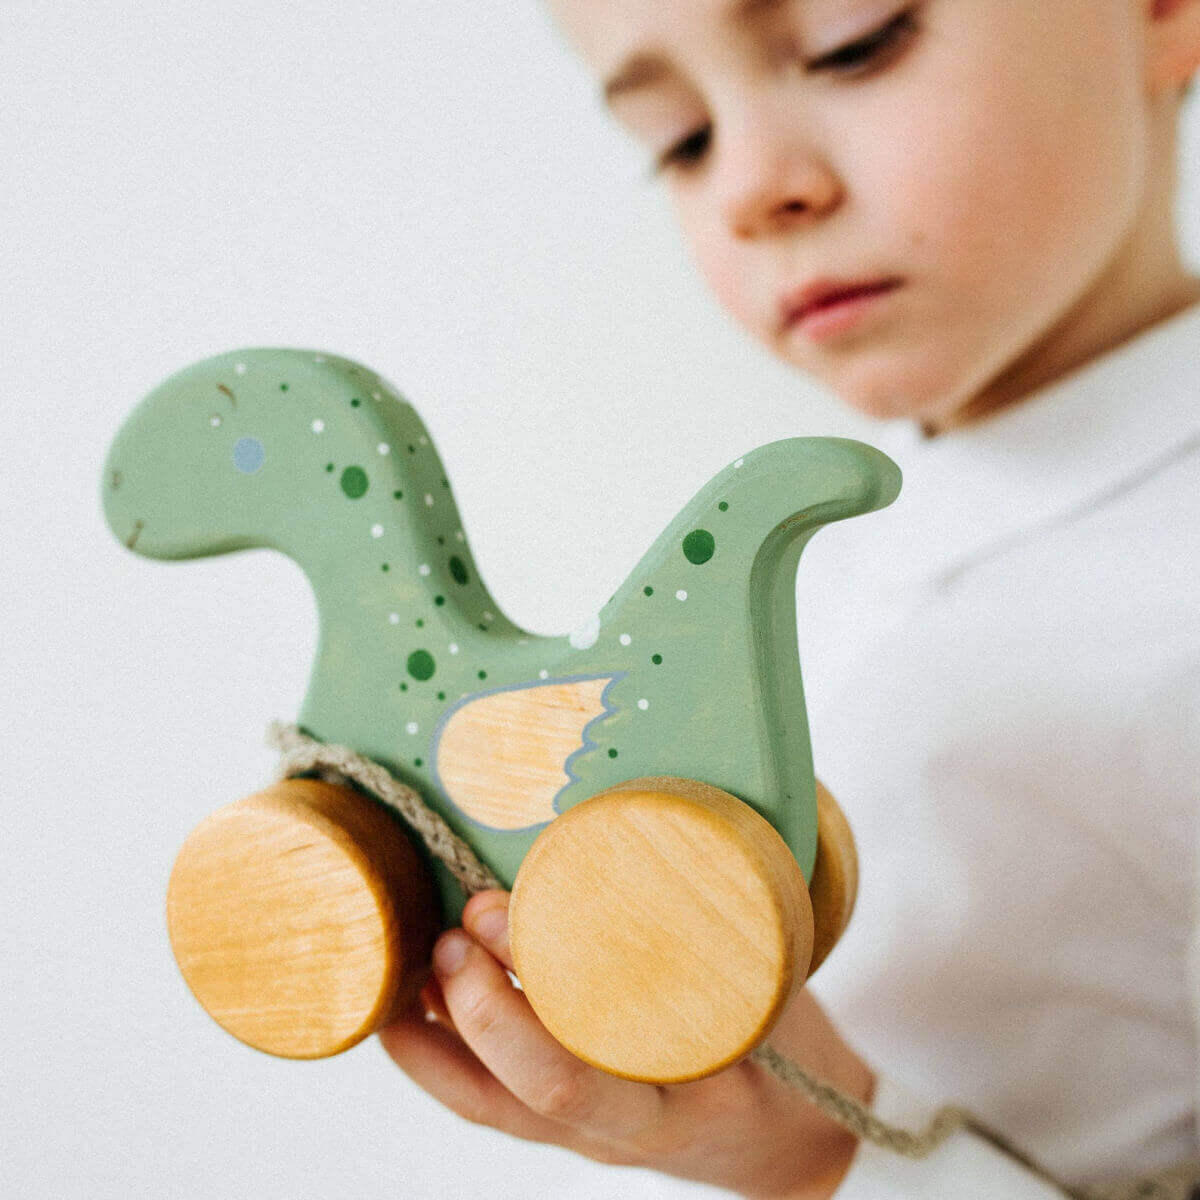 friendly toys wooden pull along toy dragon heirloom gifts